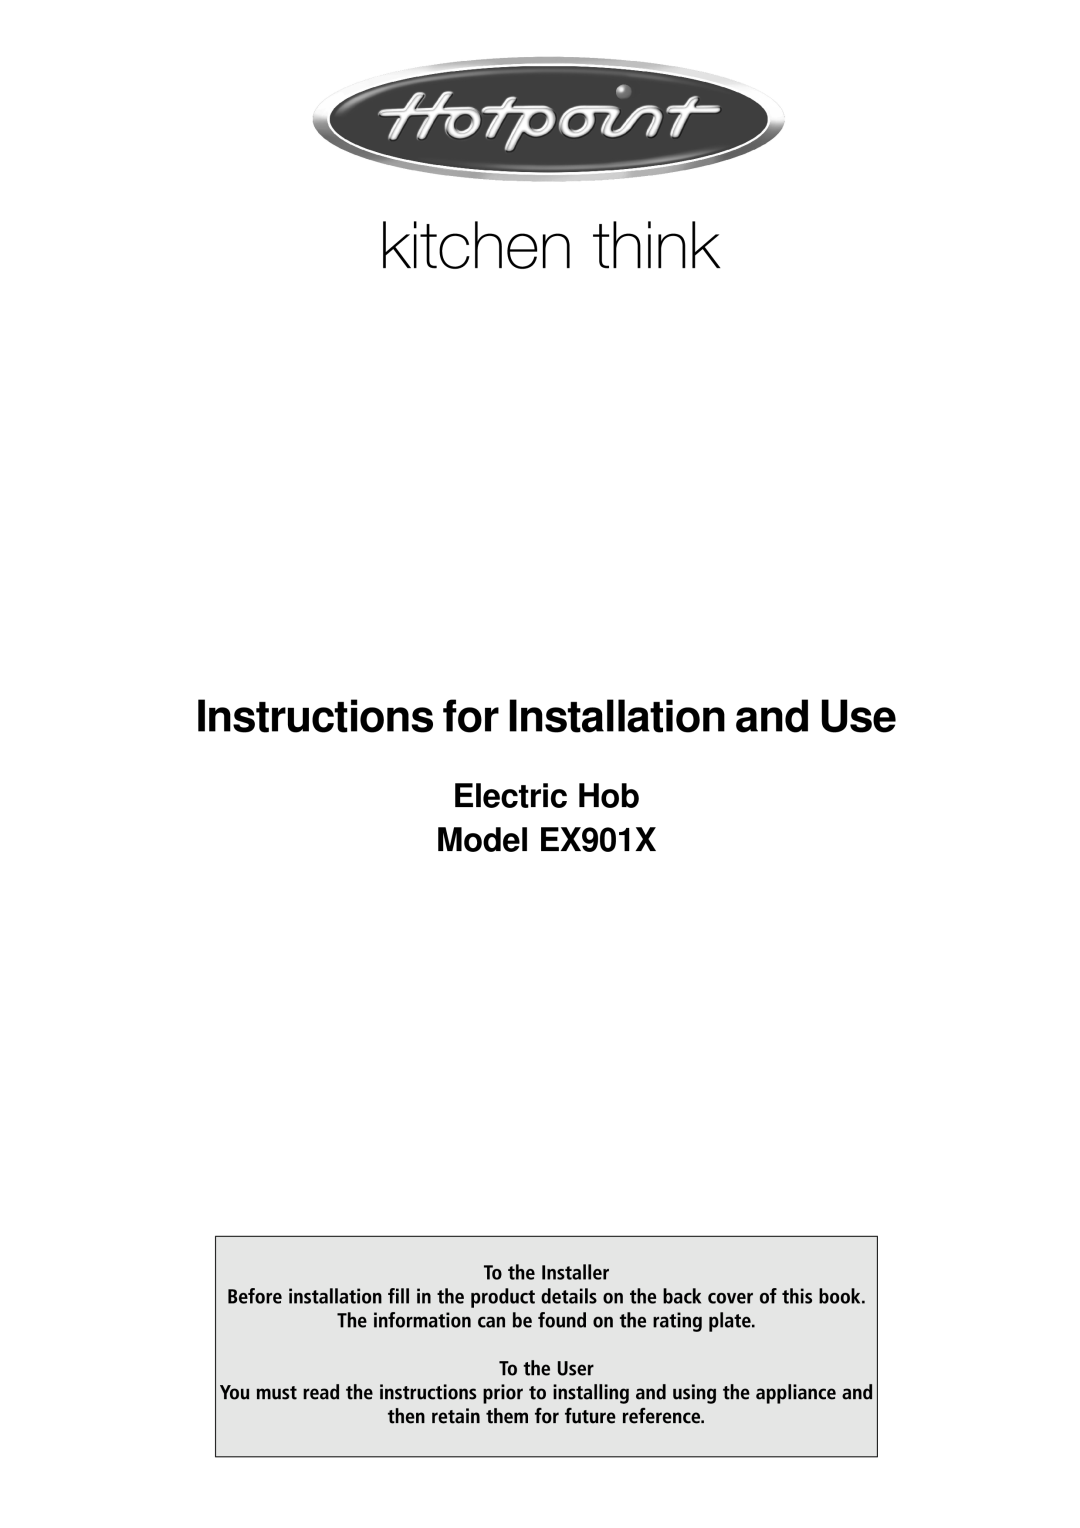 Hotpoint manual Electric Hob Model EX901X, Instructions for Installation and Use 